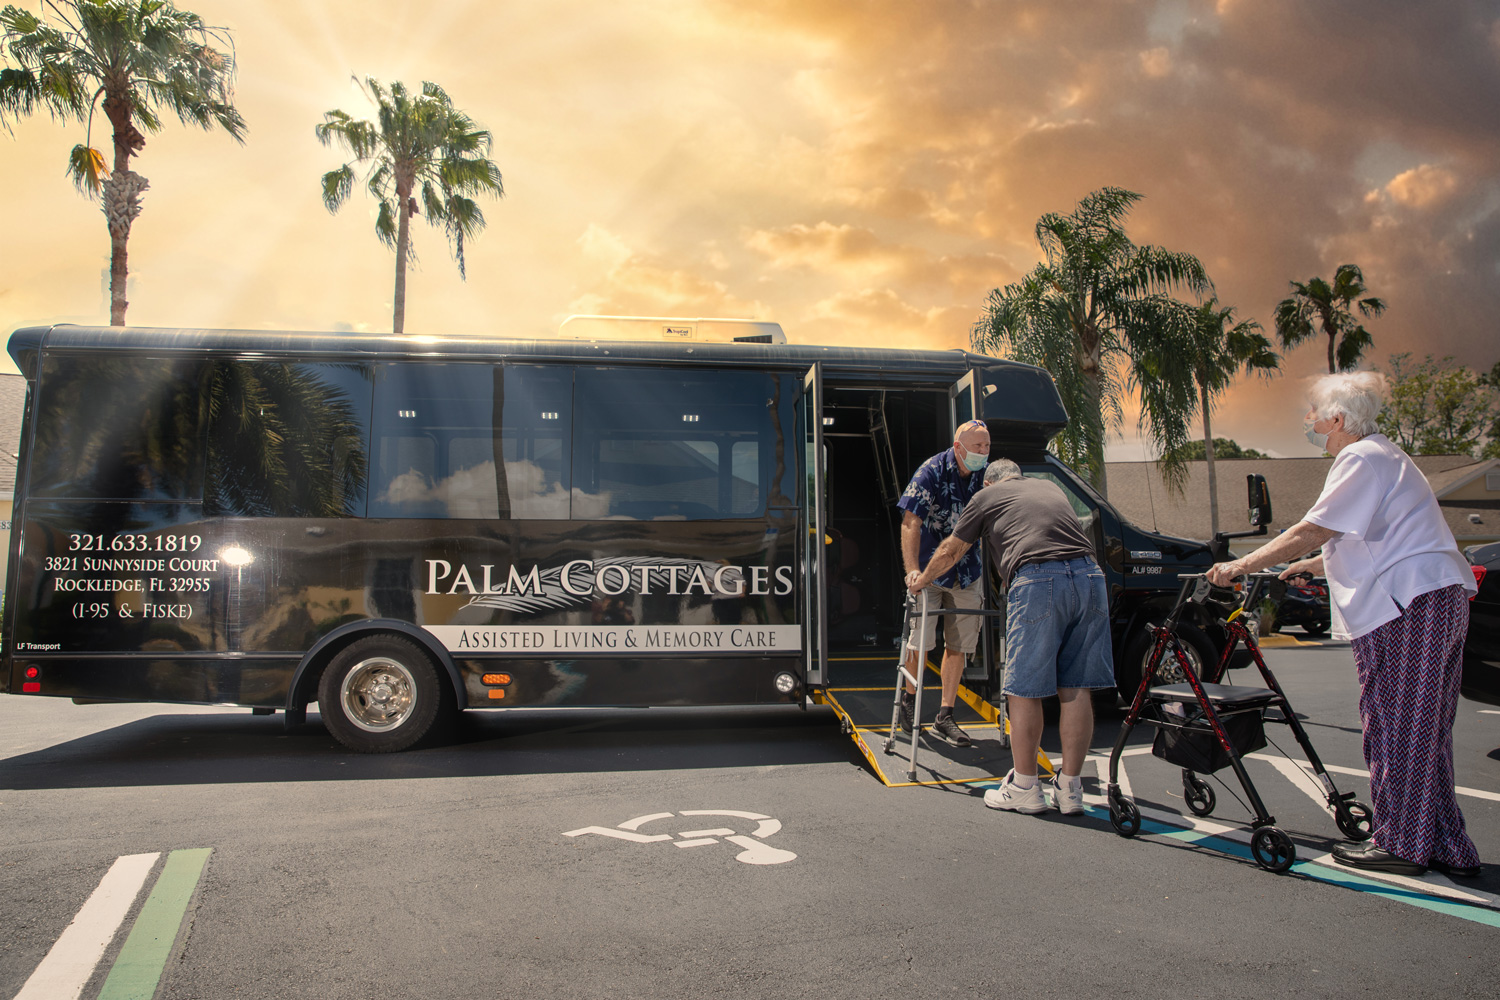 3 elderly residents boarding Palm Cottages bus for an afternoon outing